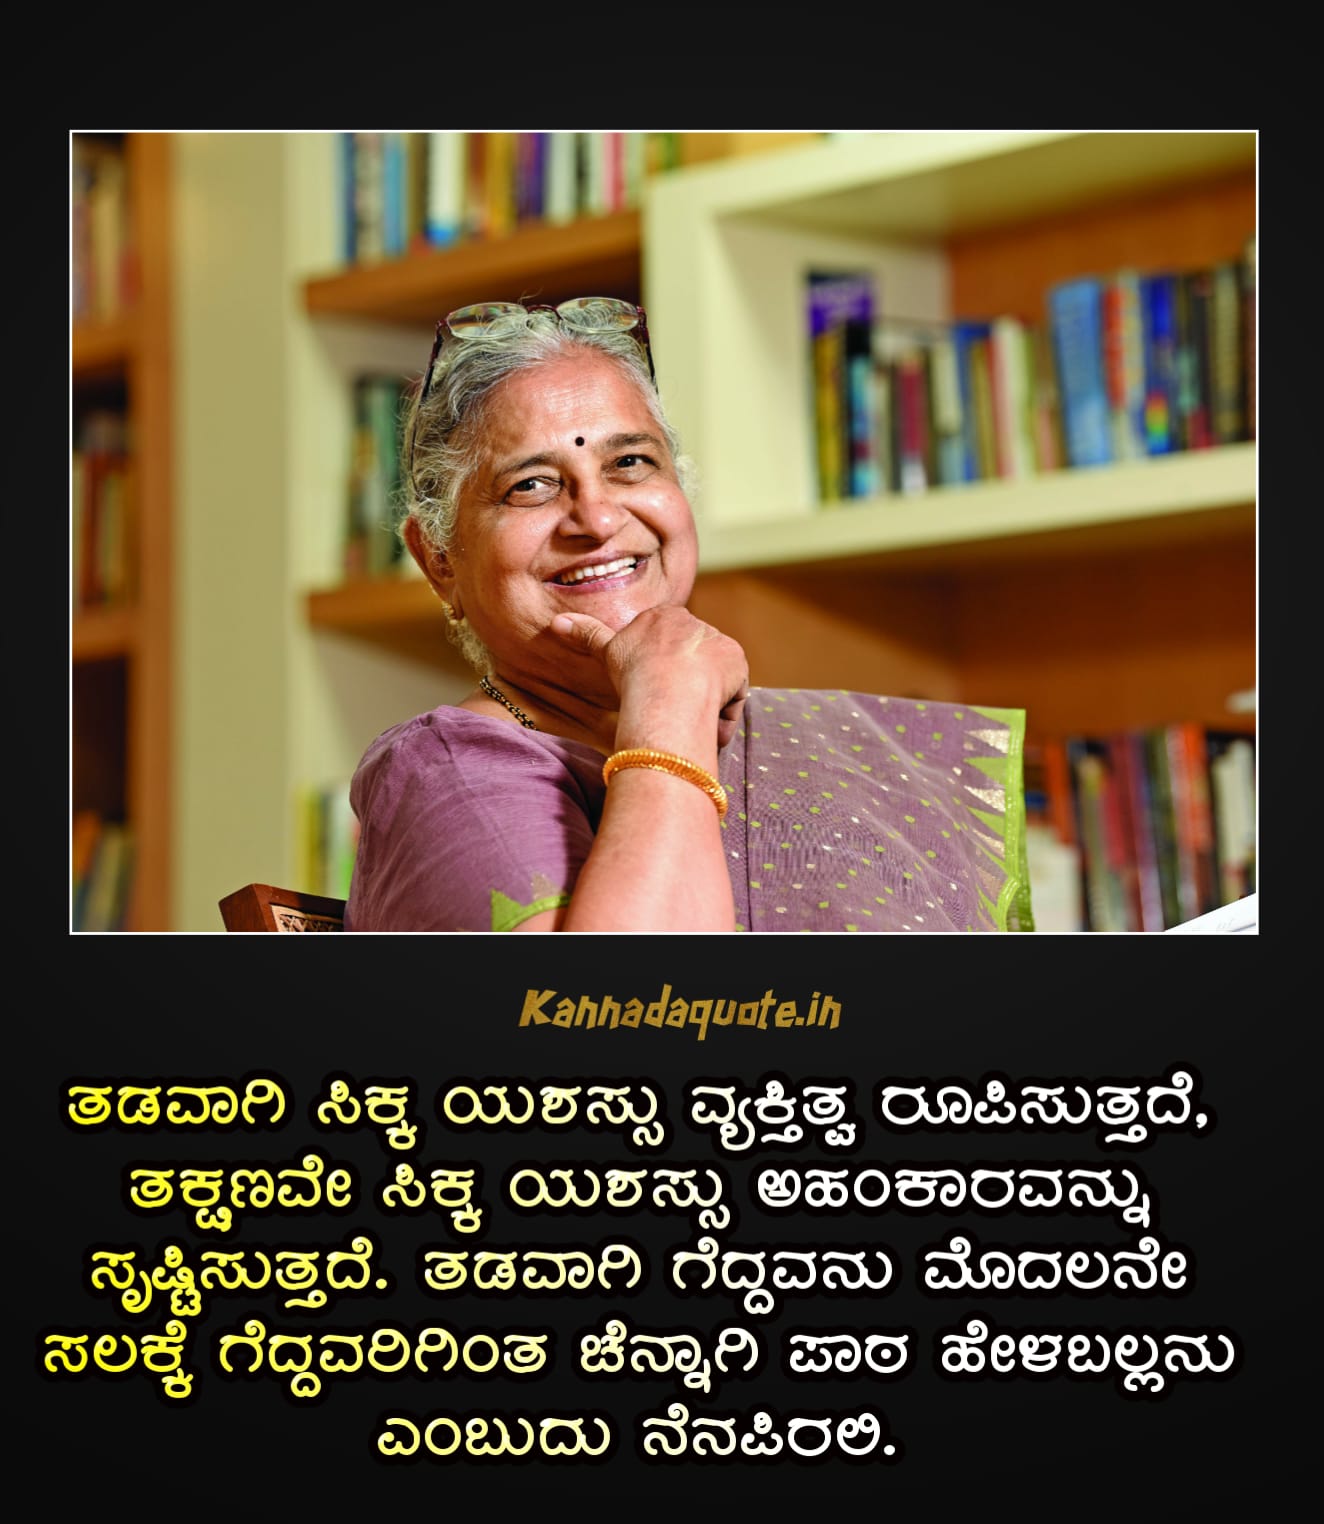 Sudha Murthy Thoughts and motivational quotes in Kannada